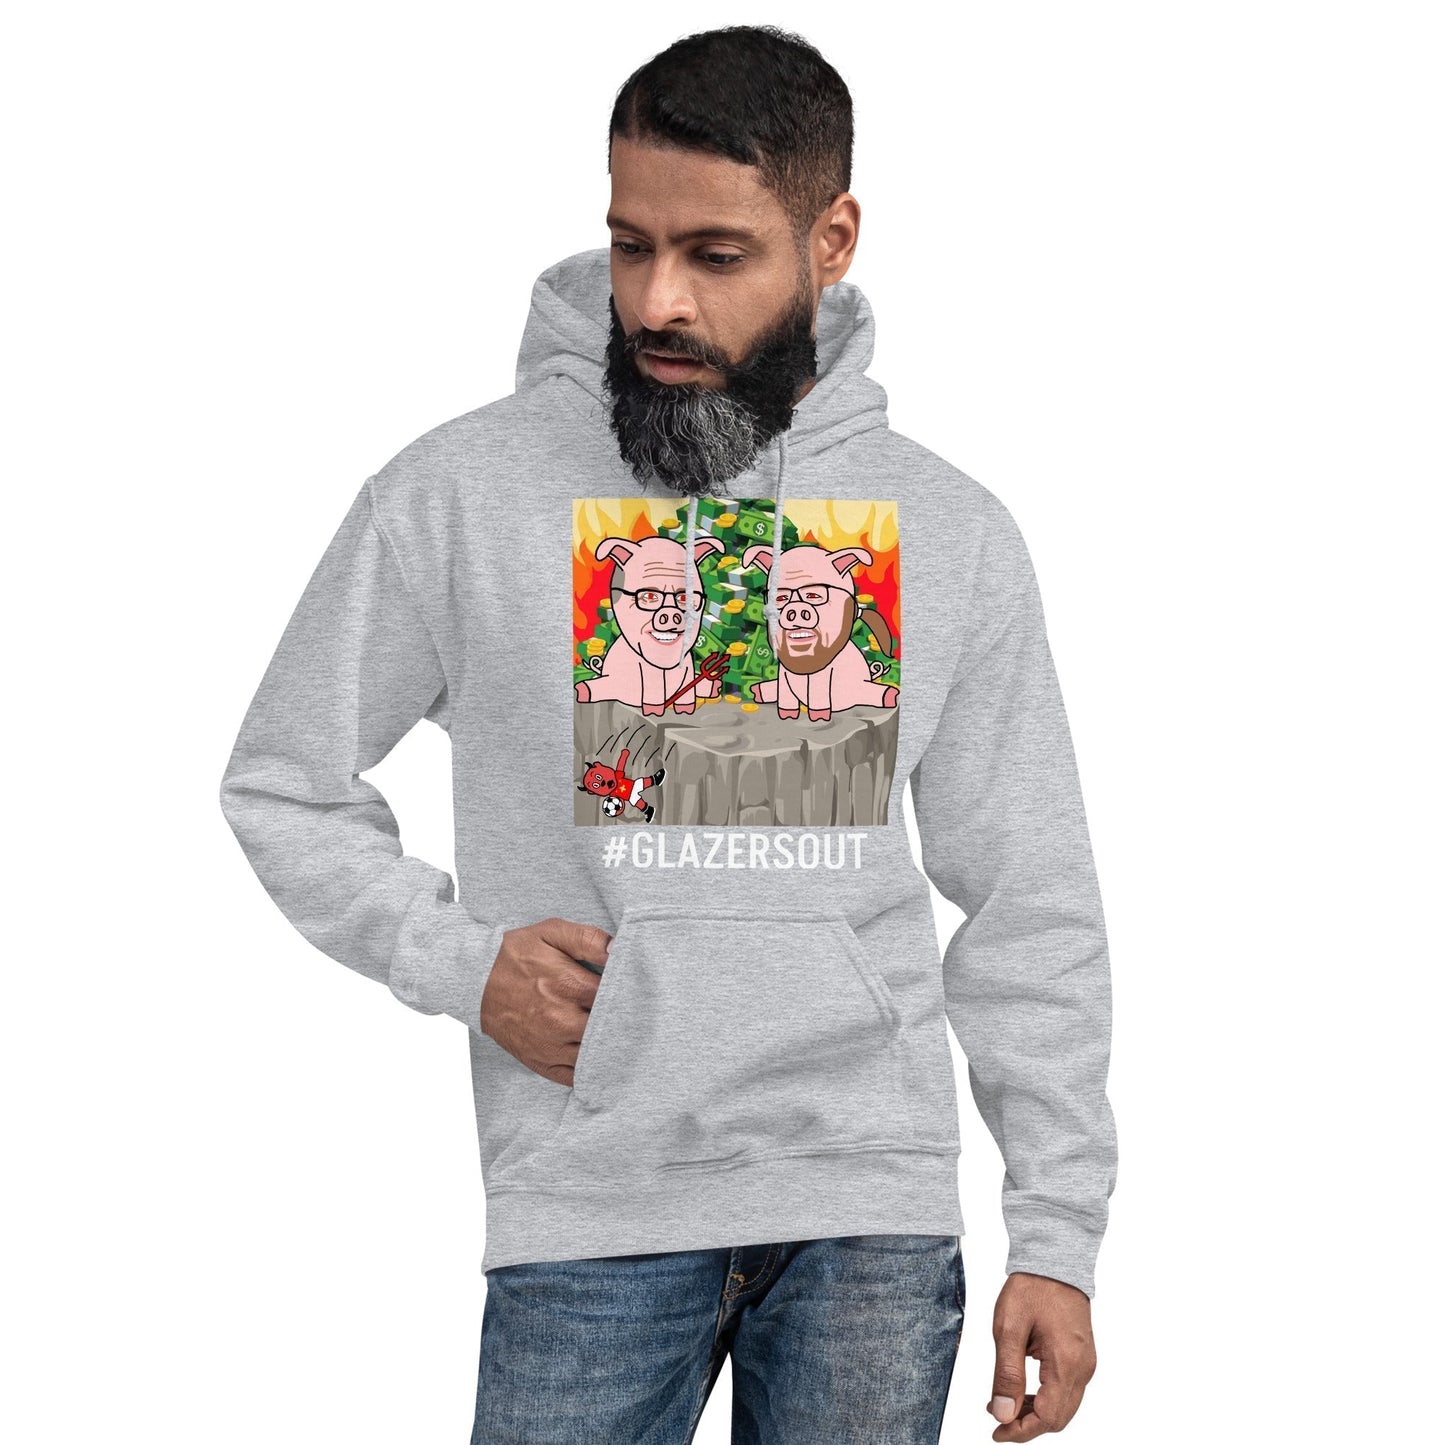 Glazers Out Manchester United Unisex Hoodie, White Letters, #GlazersOut Next Cult Brand Football, GlazersOut, Manchester United